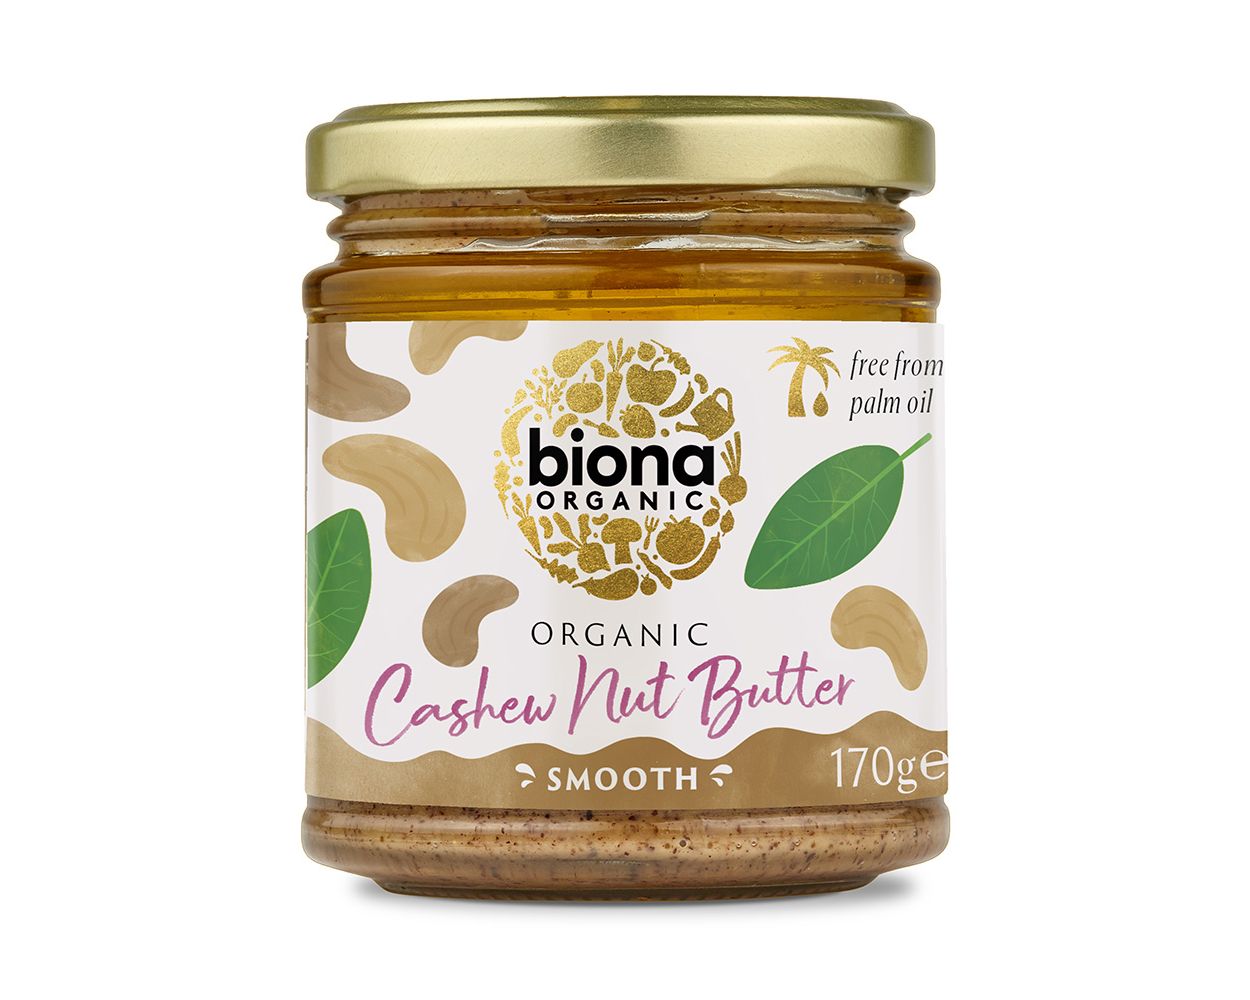 Delicious Bio-Quality Peanut Butter without Palm Oil from Biona